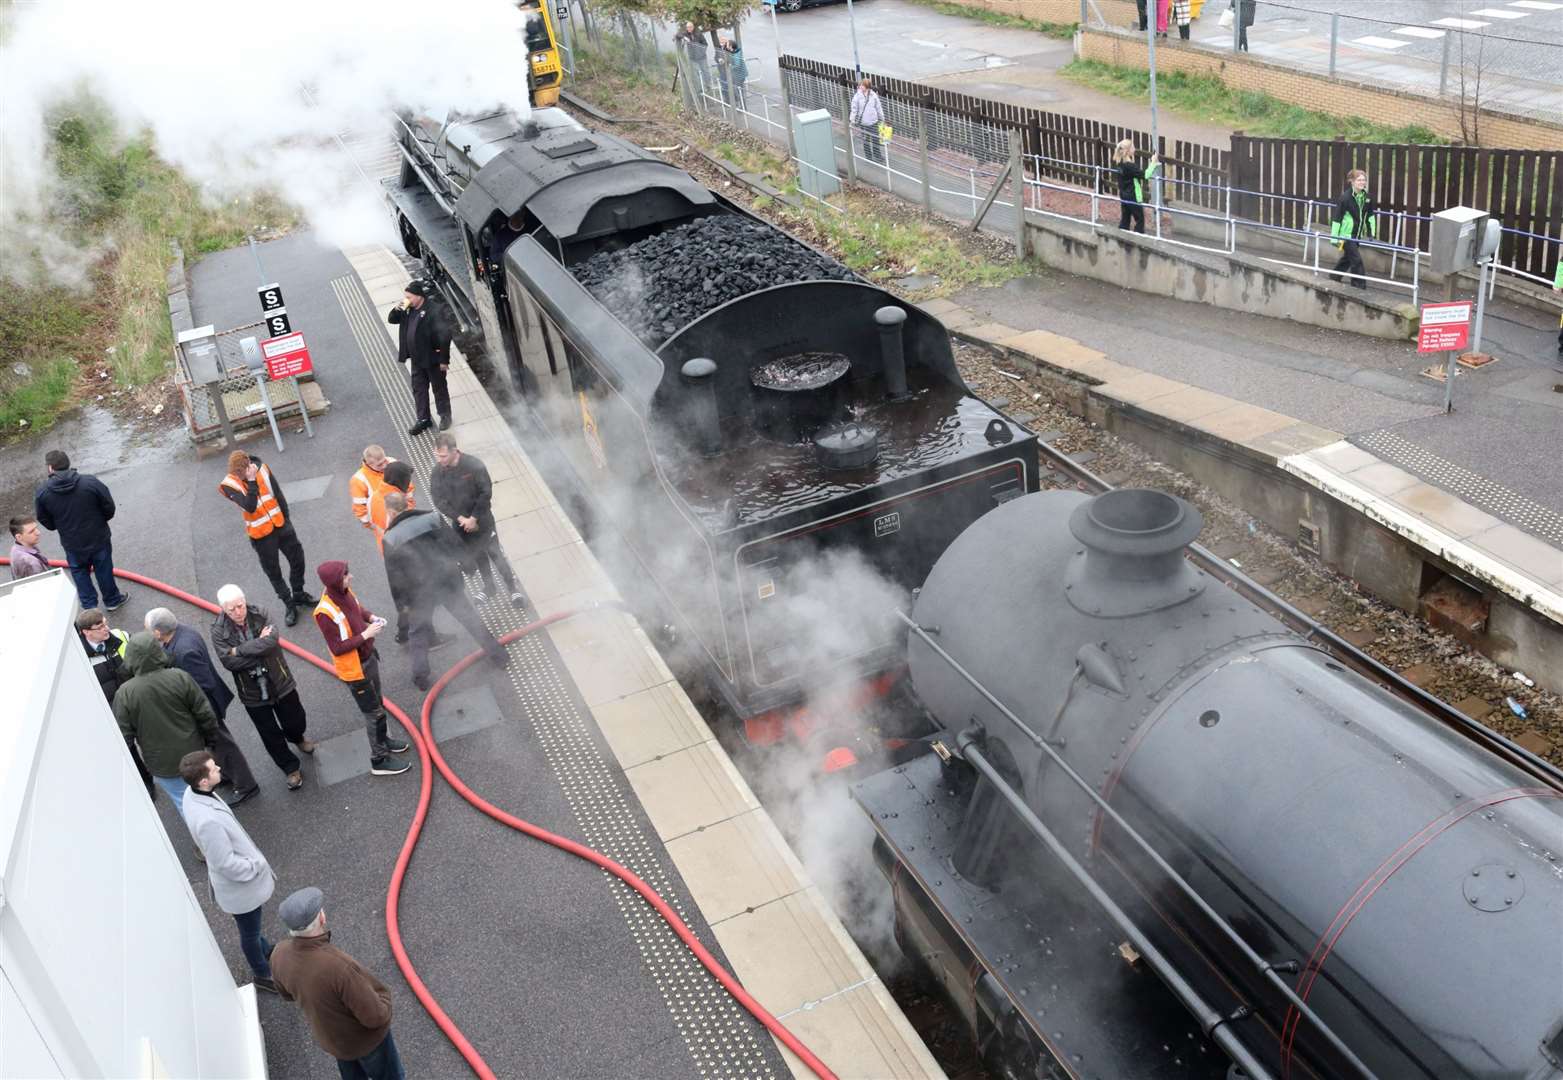 Great Britain XVI departs from Elgin station as it heads round the UK